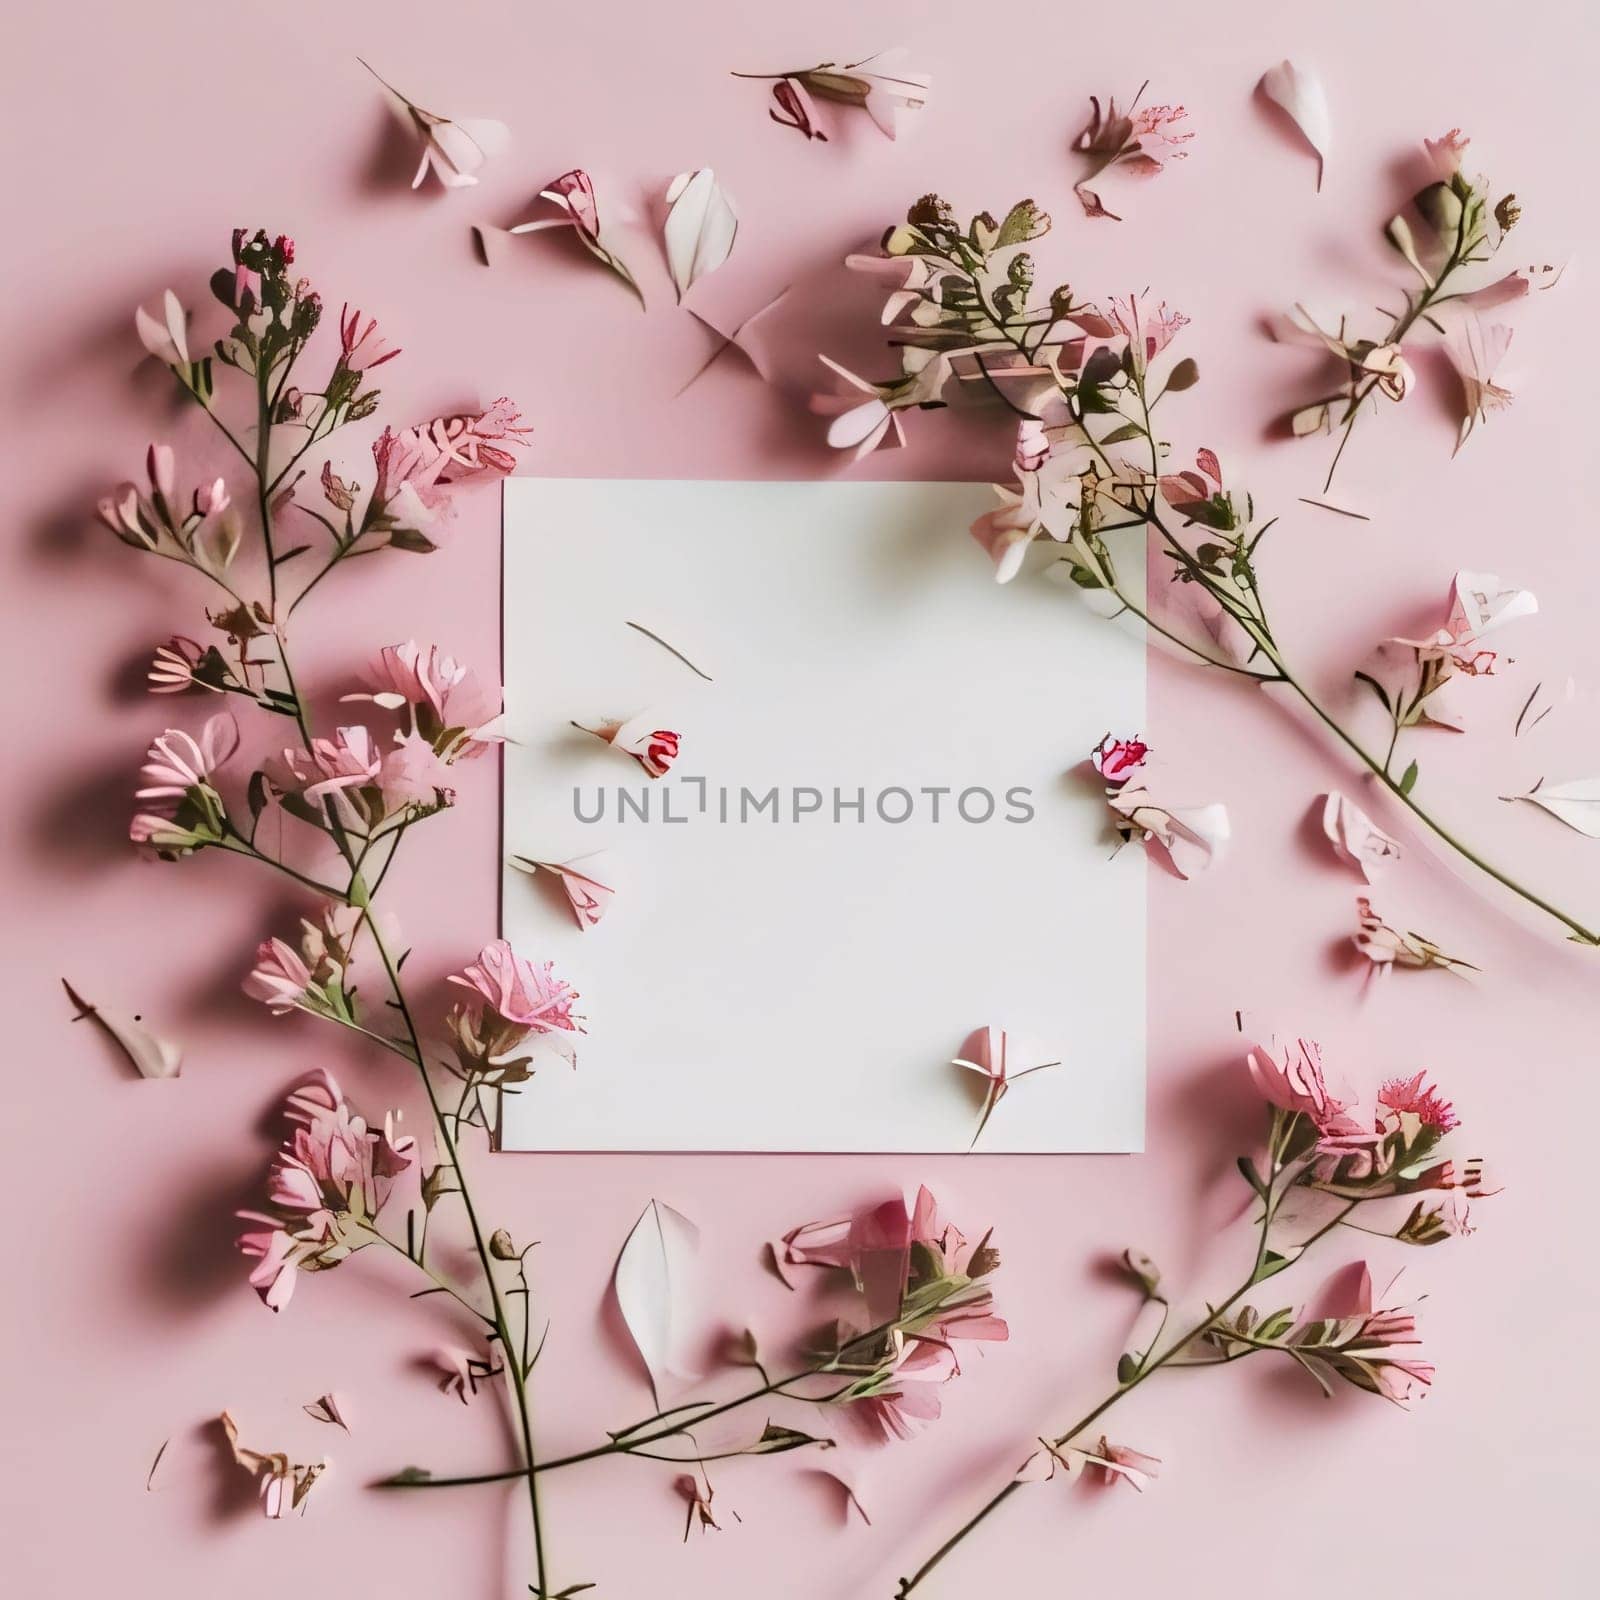 White blank card on a pink background around scattered pink flower petals. Places on their own content. Flowering flowers, a symbol of spring, new life. A joyful time of nature waking up to life.